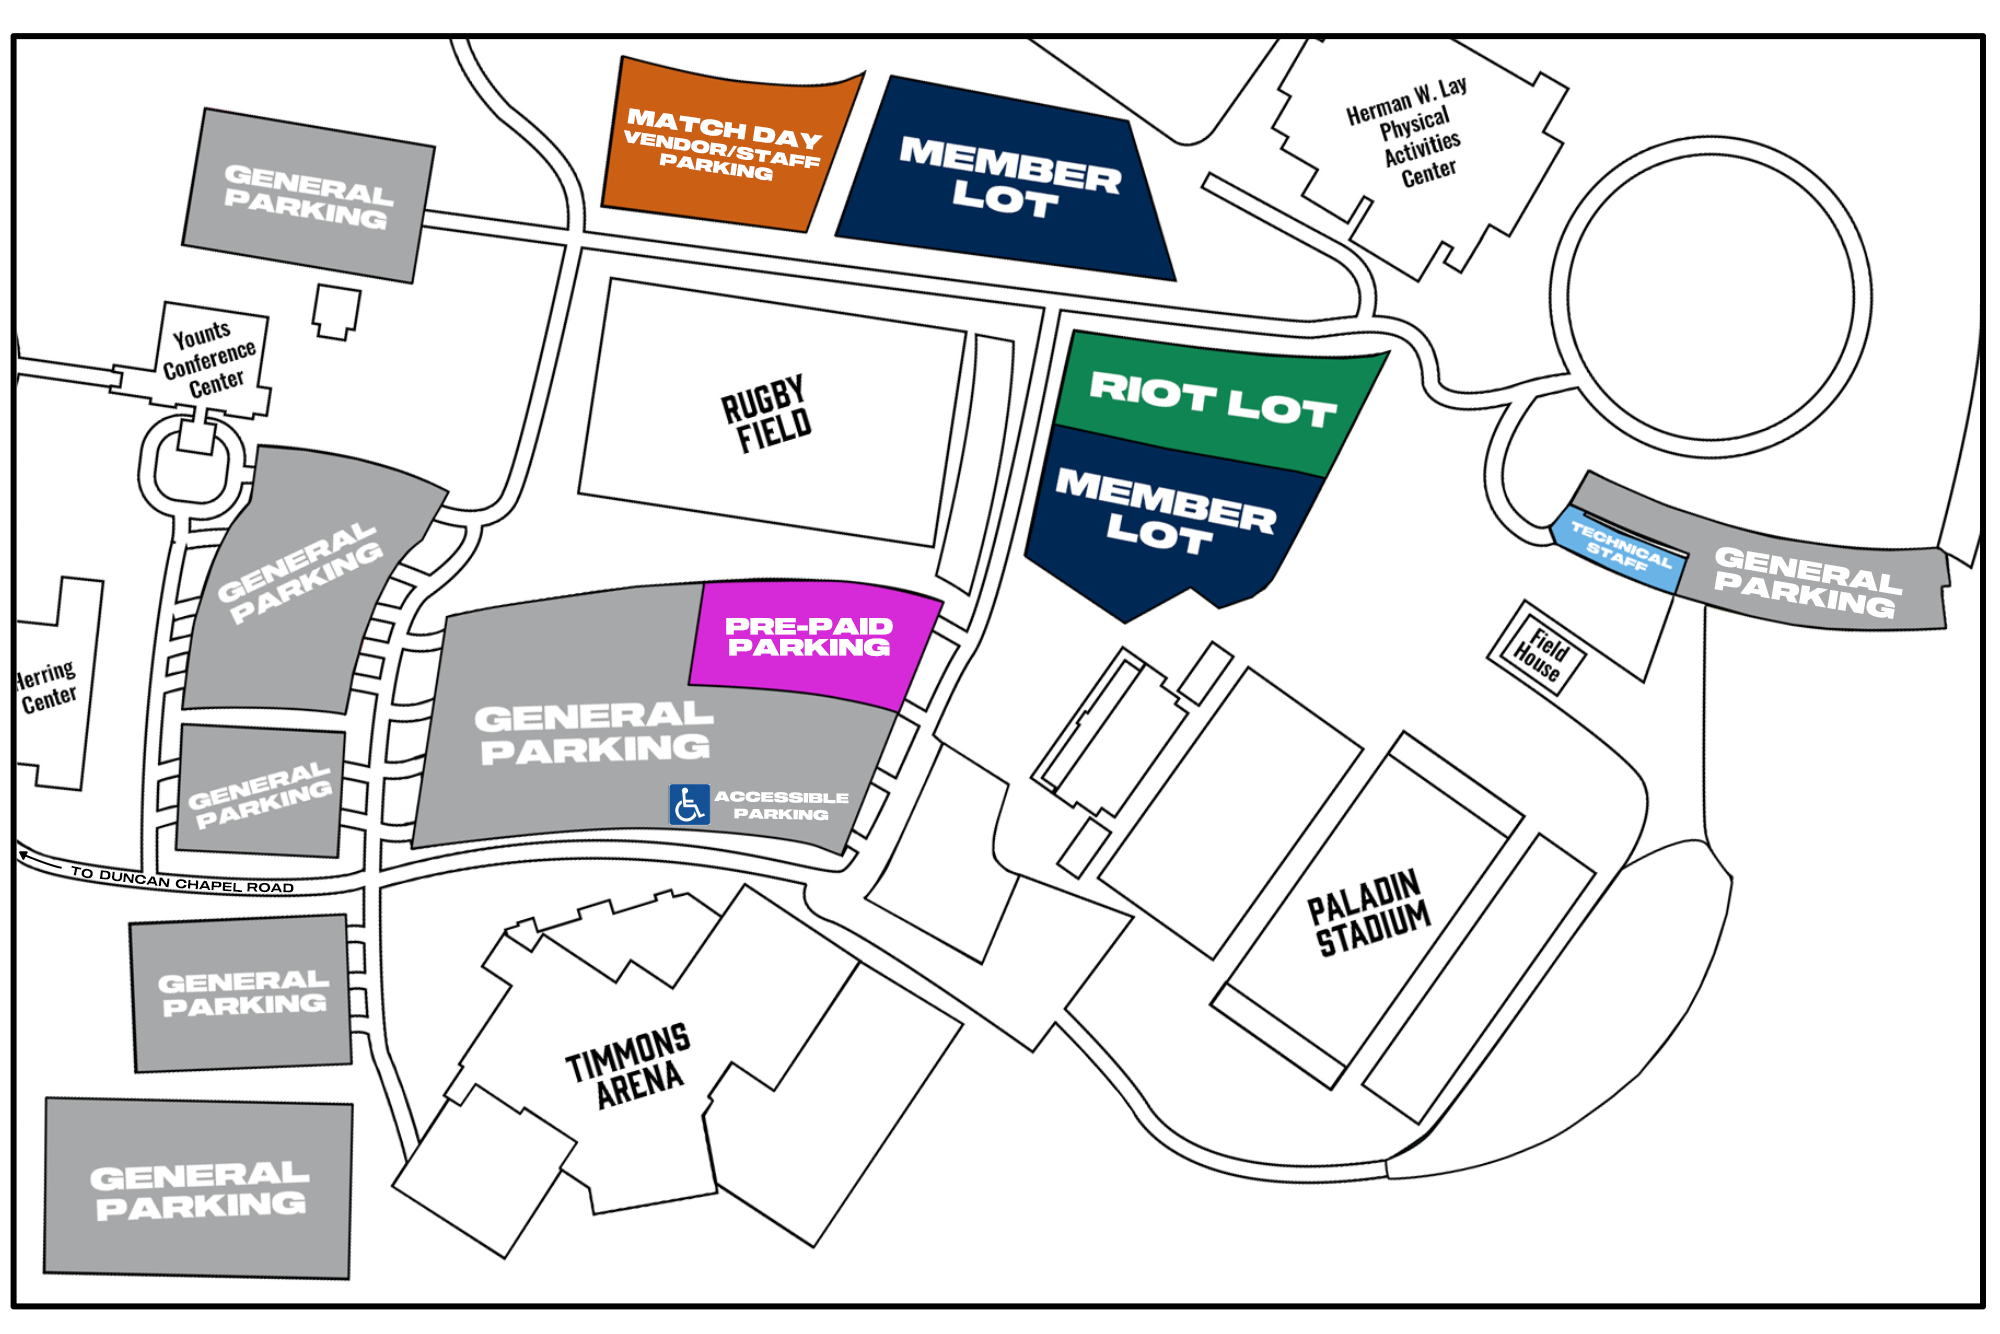 Main parking plan for match day.